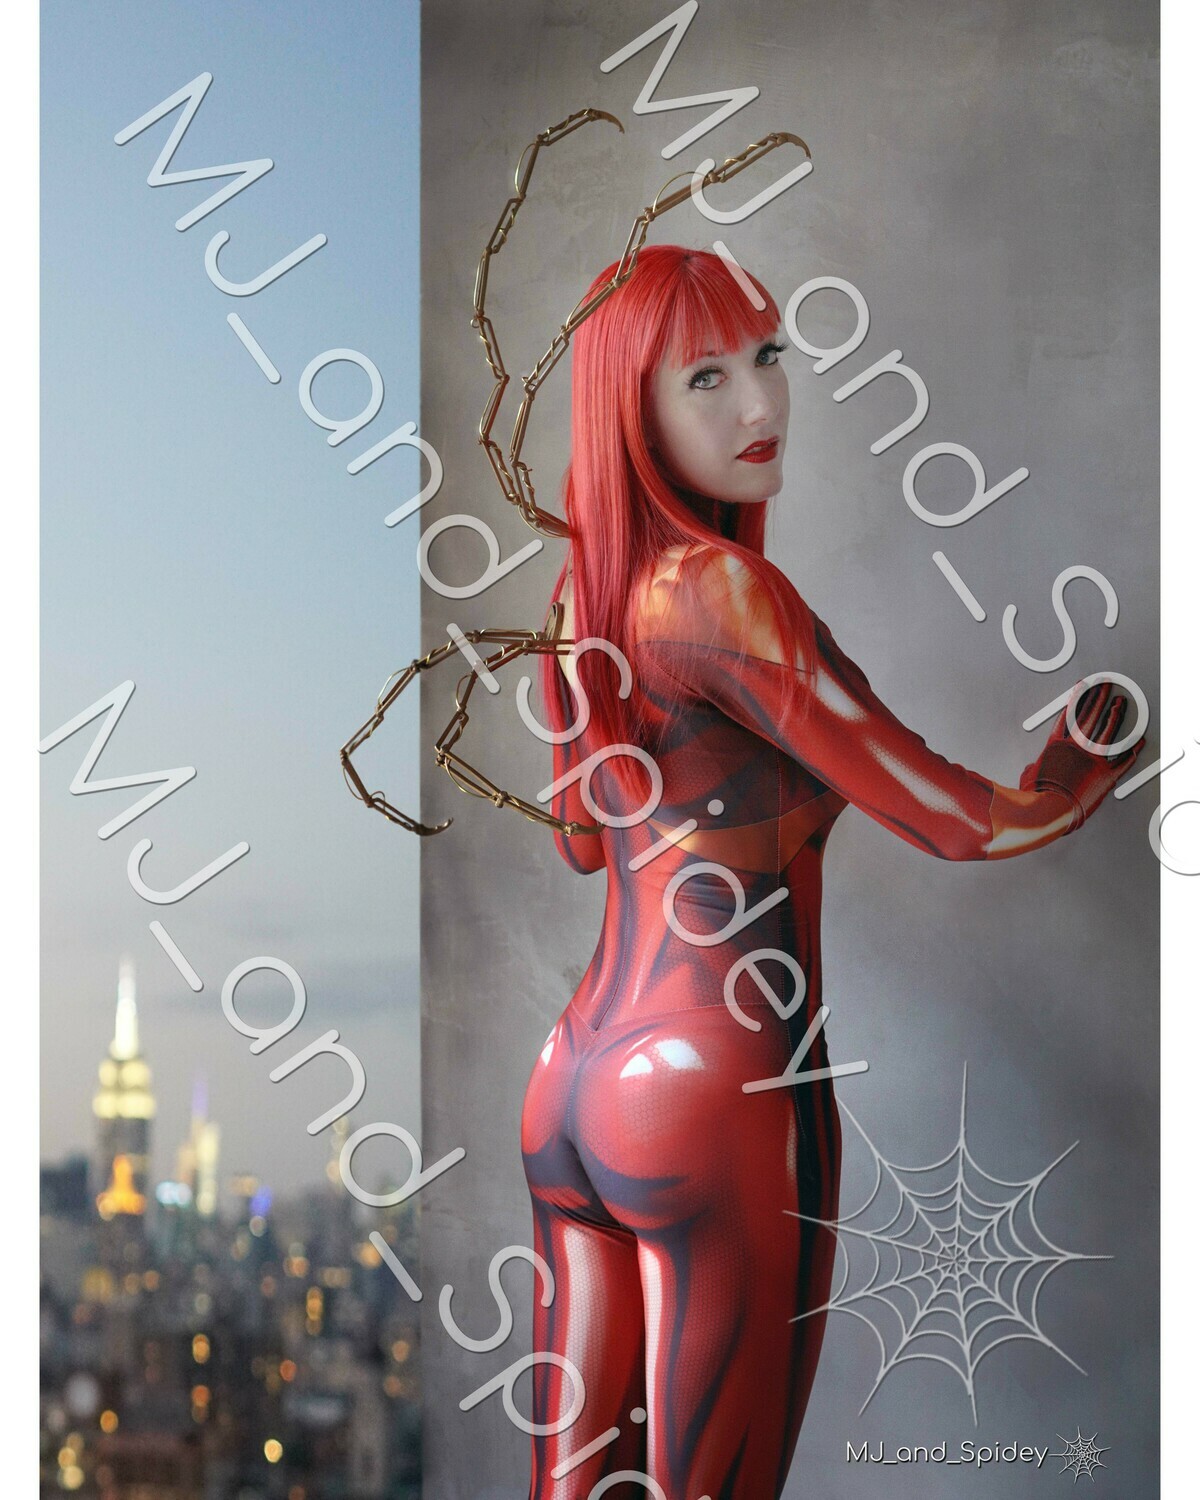 Marvel - Spider-Man - Mary Jane Watson - Iron Spider 4 - Digital Cosplay Image (@MJ_and_Spidey, MJ and Spidey, Comics)